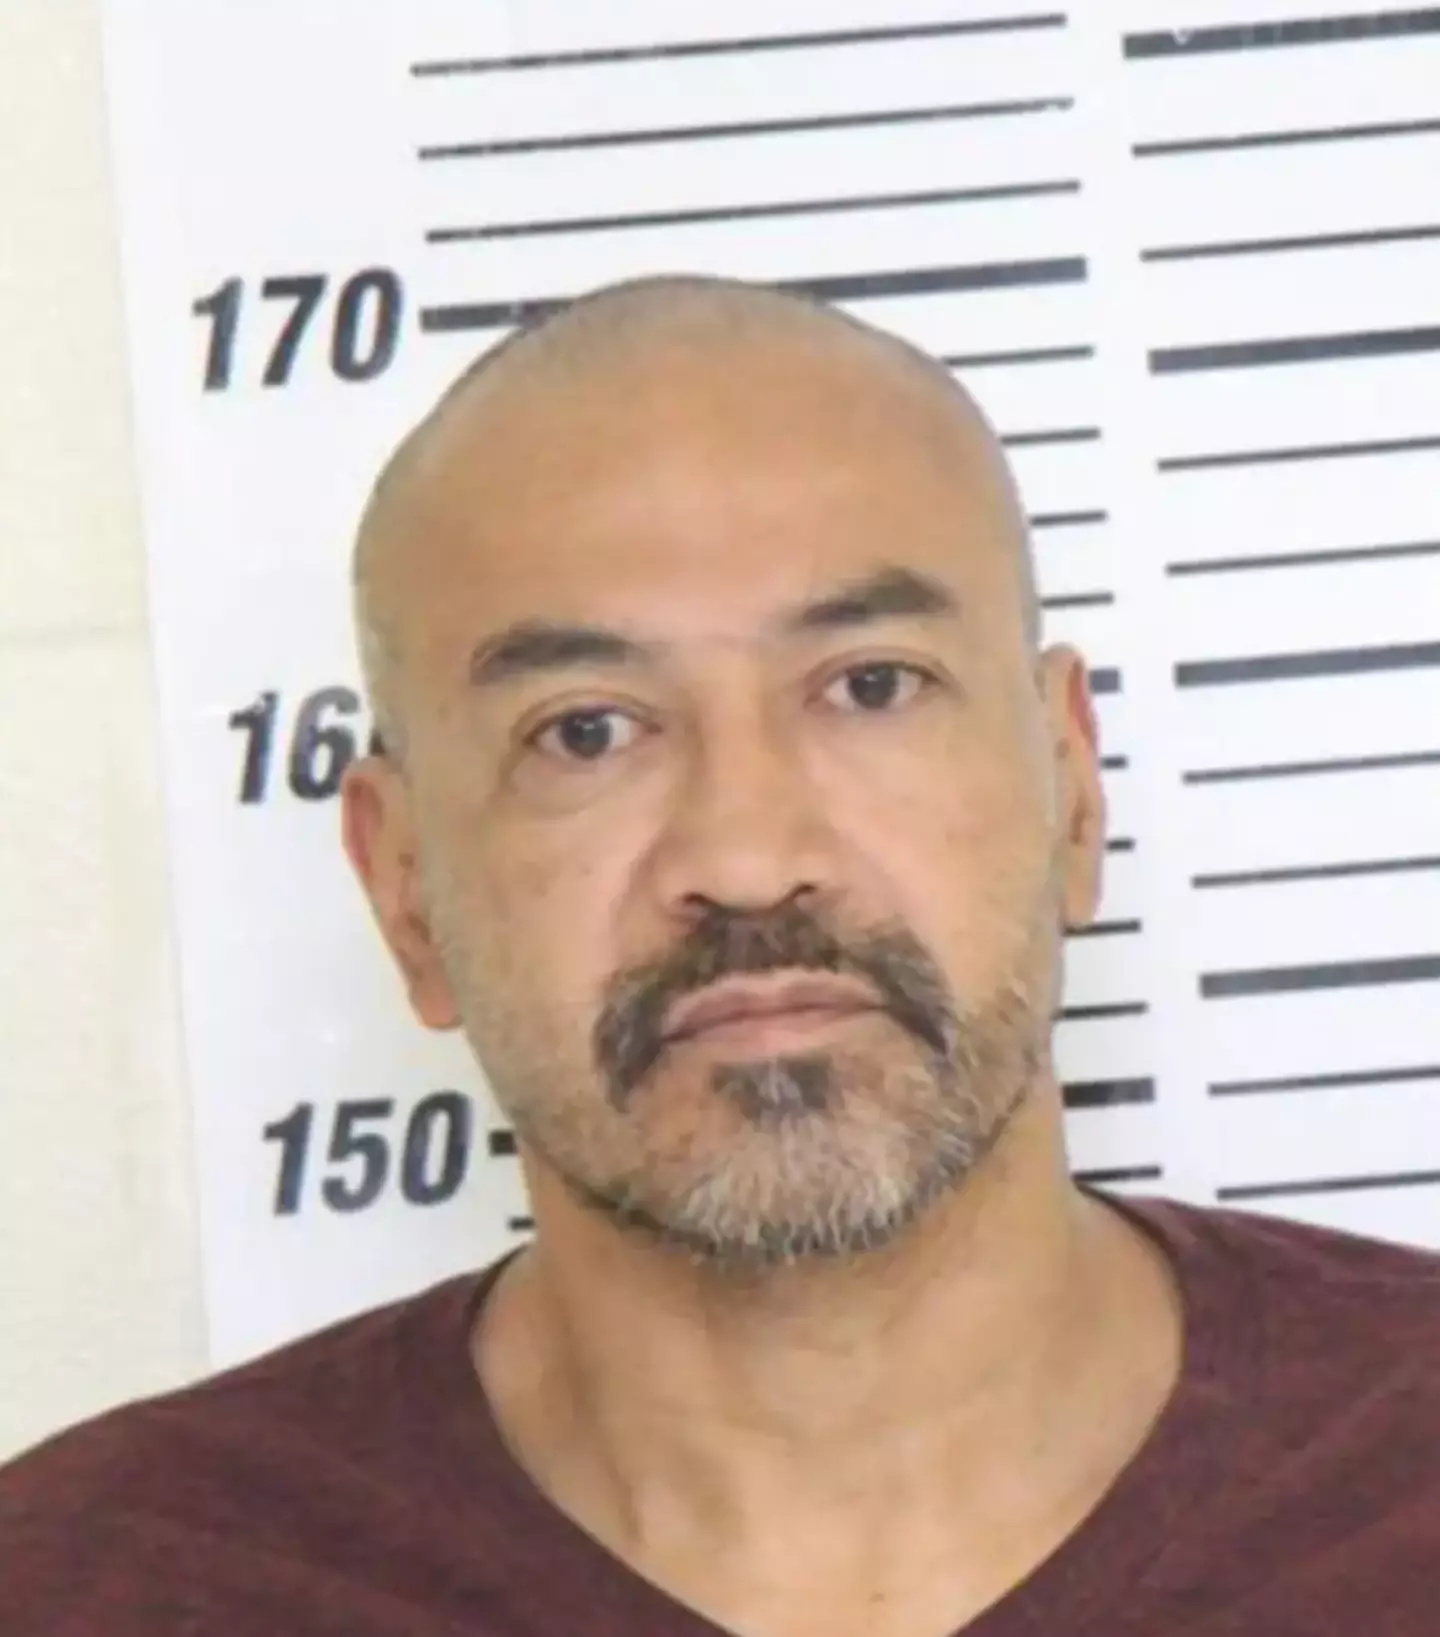 Ricardo Esparza tried and failed to bribe police officers.